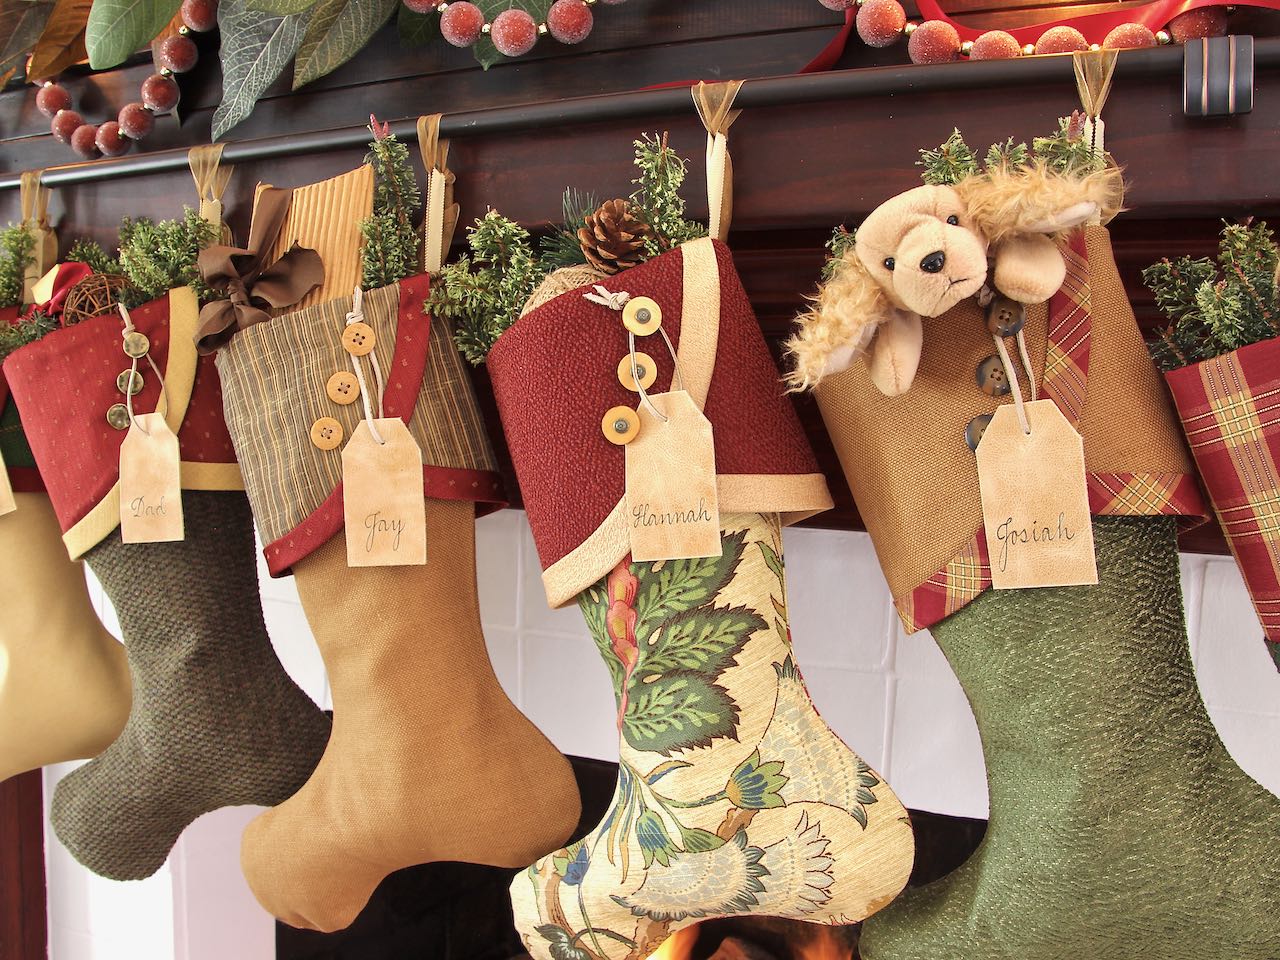 4 coordinating Christmas stockings are hanging with tan leather name tags hanging from their buttons